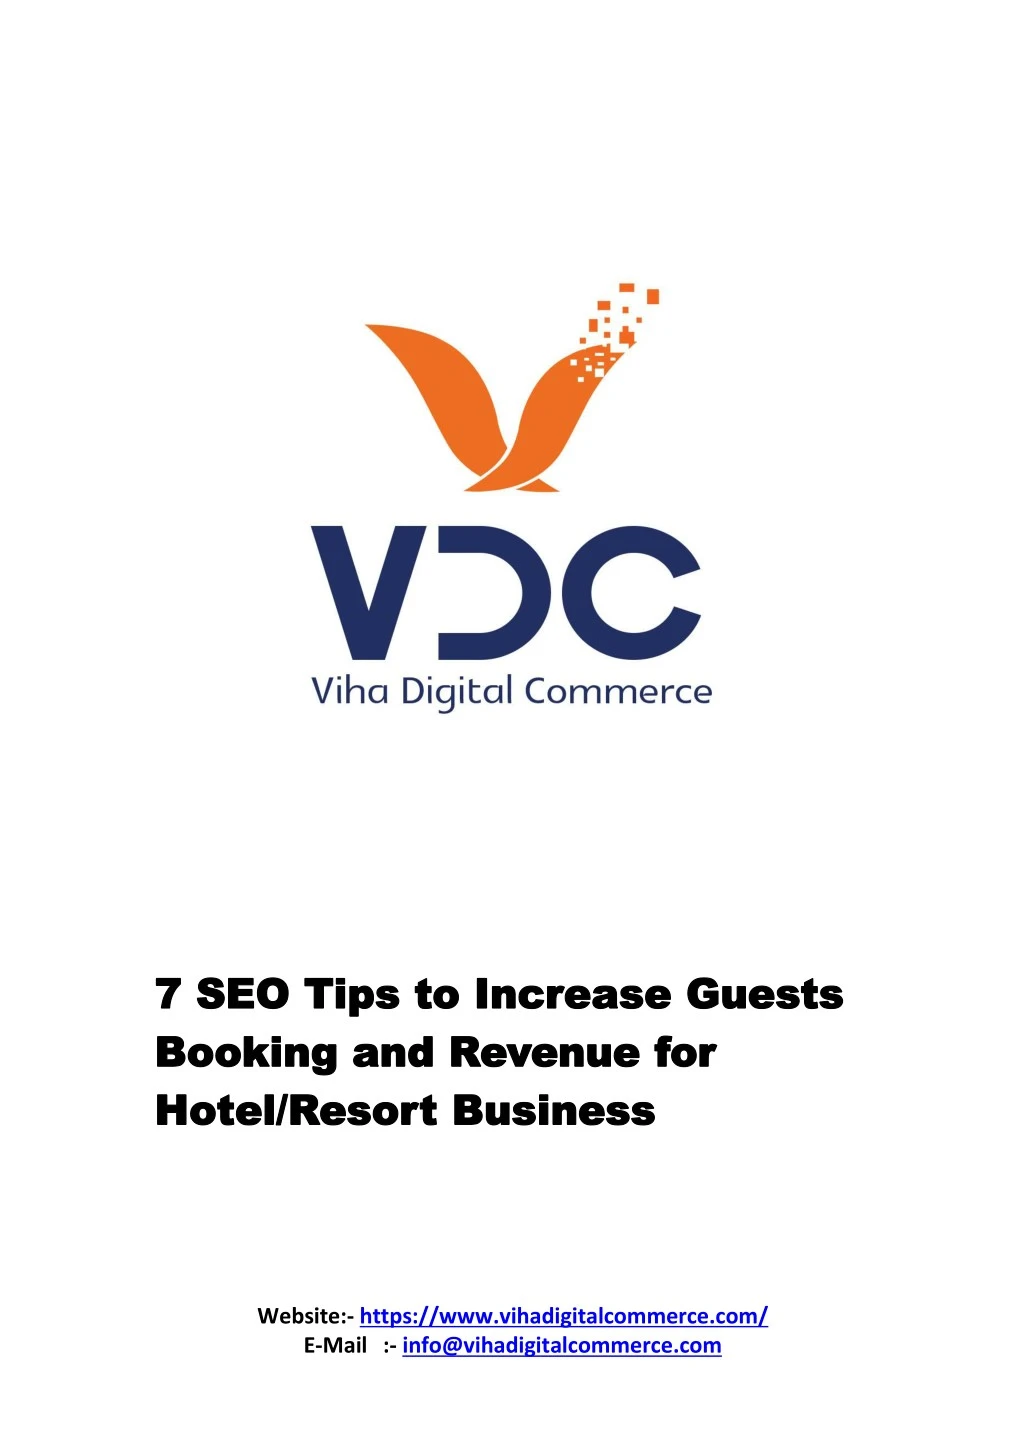 7 7 seo seo tips booking booking and hotel resort